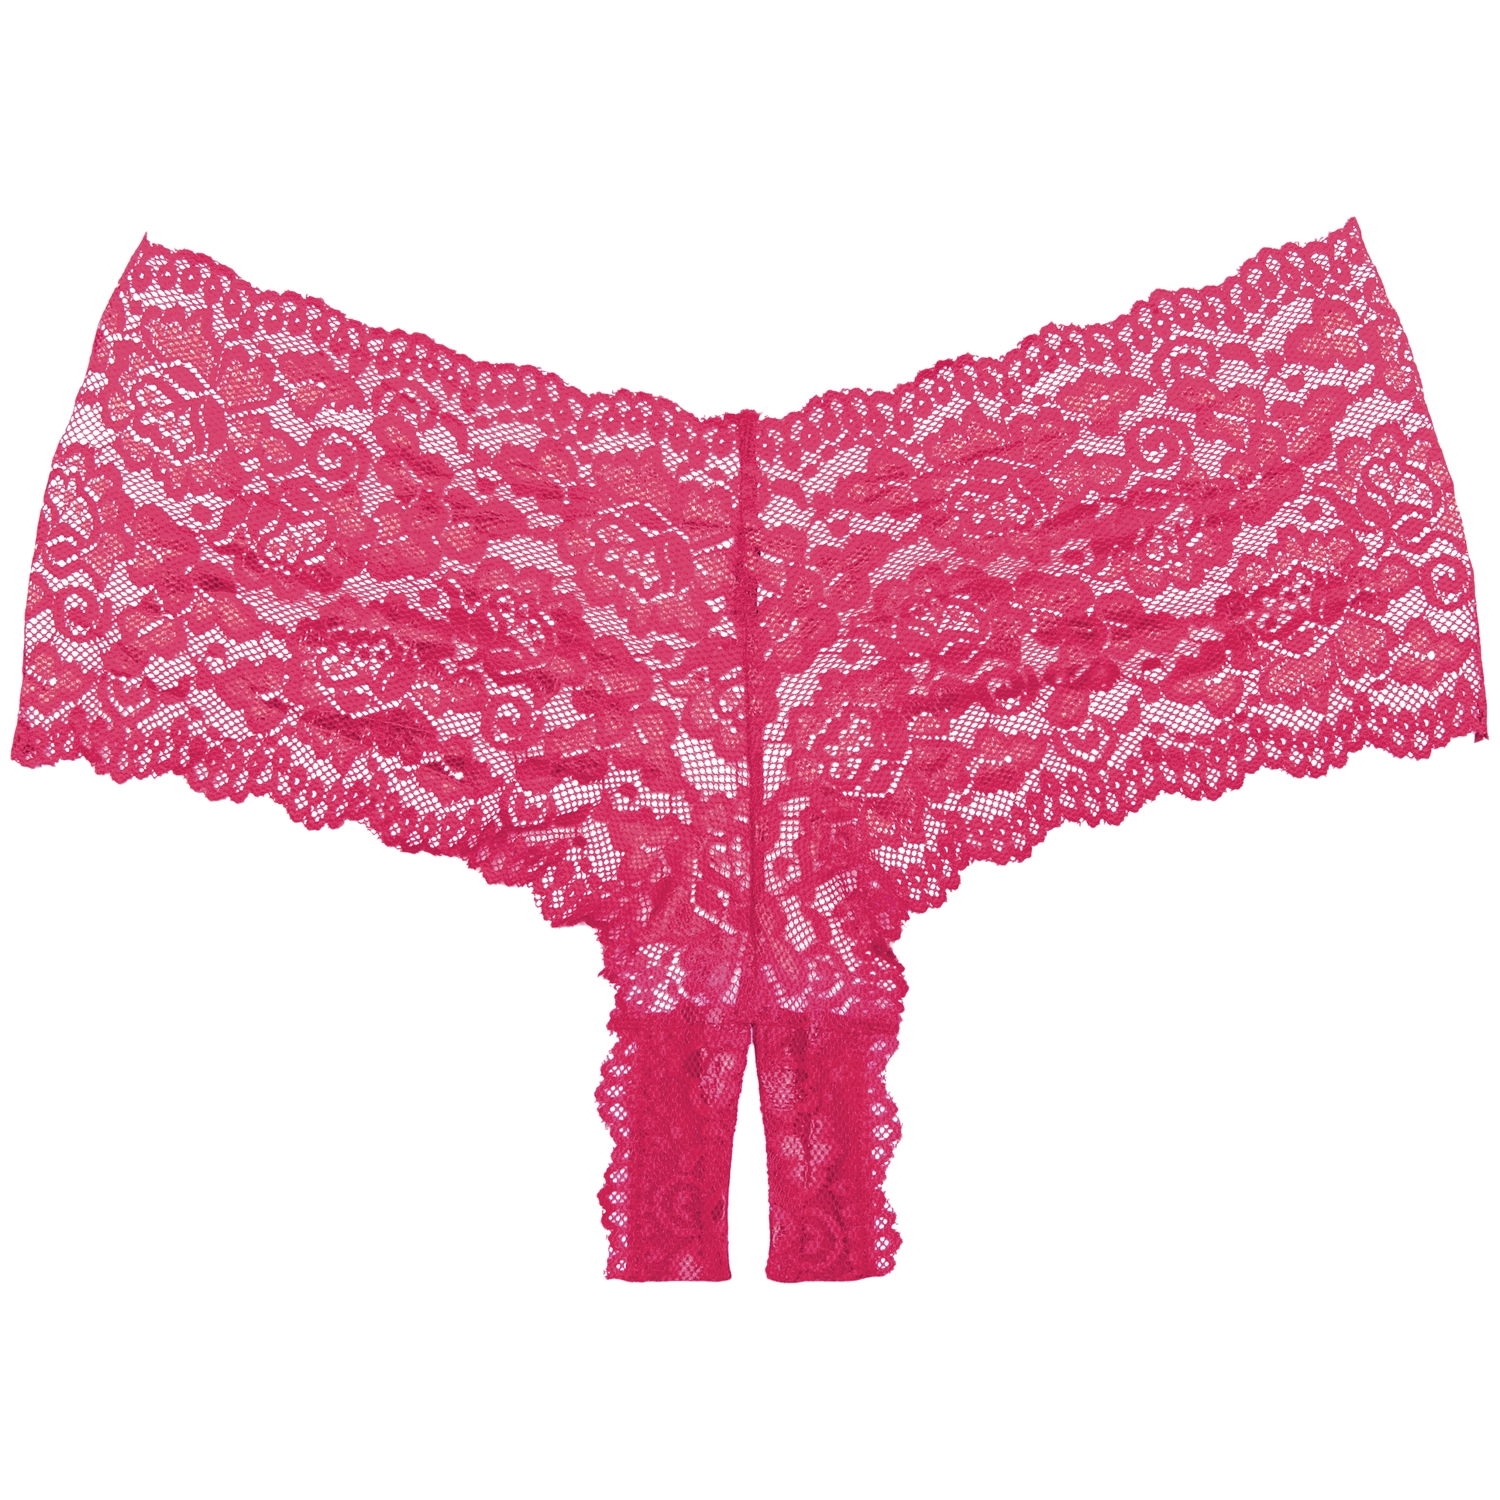 Allure Lingerie Adore Candy Apple Rosa Hipster - Lyserosa